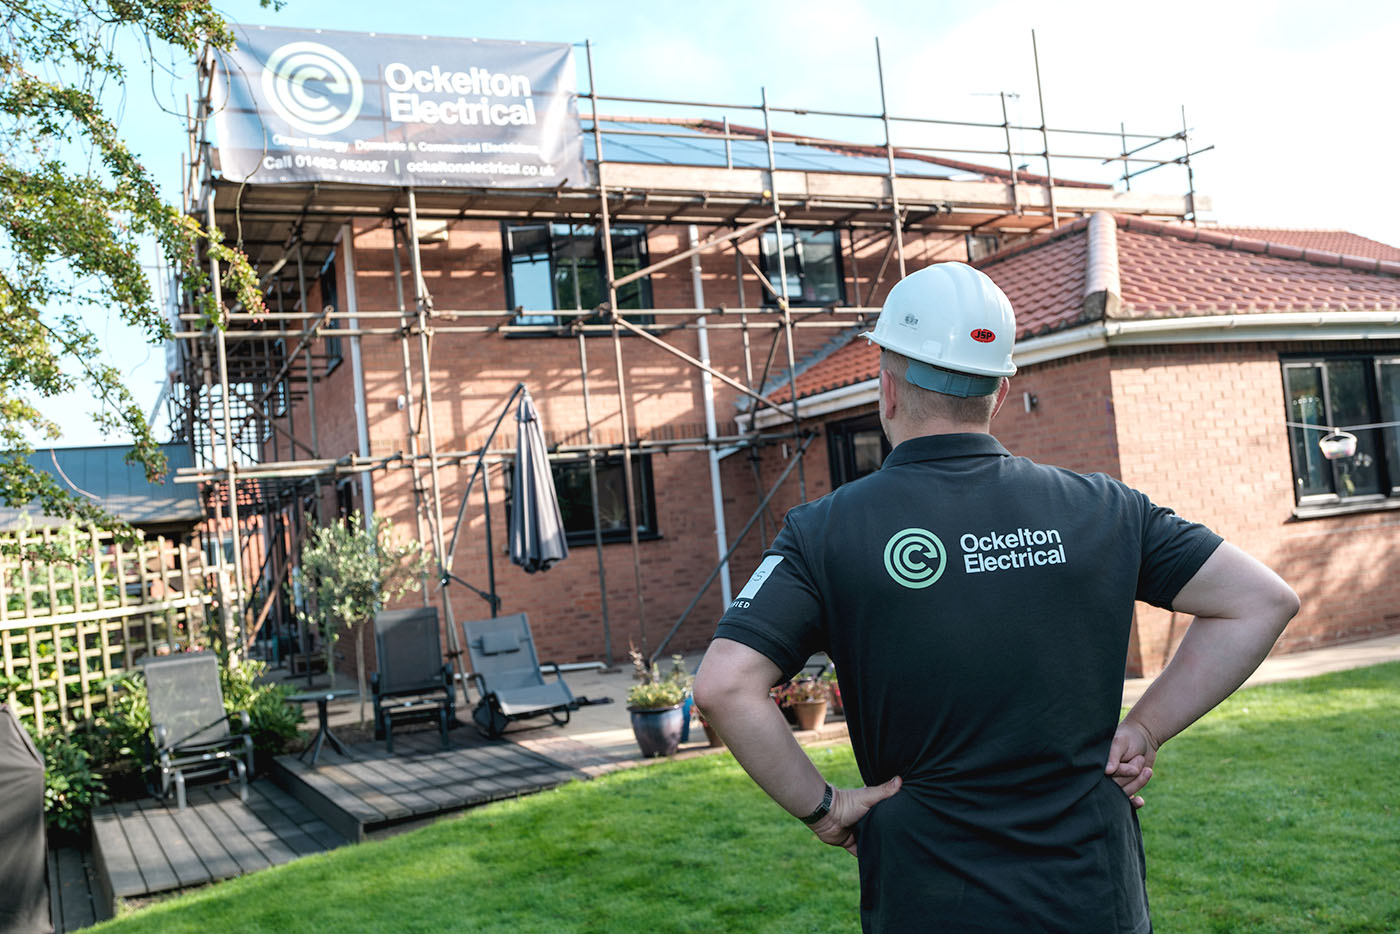 Ockelton Electrical worker looking at a house with scaffolding